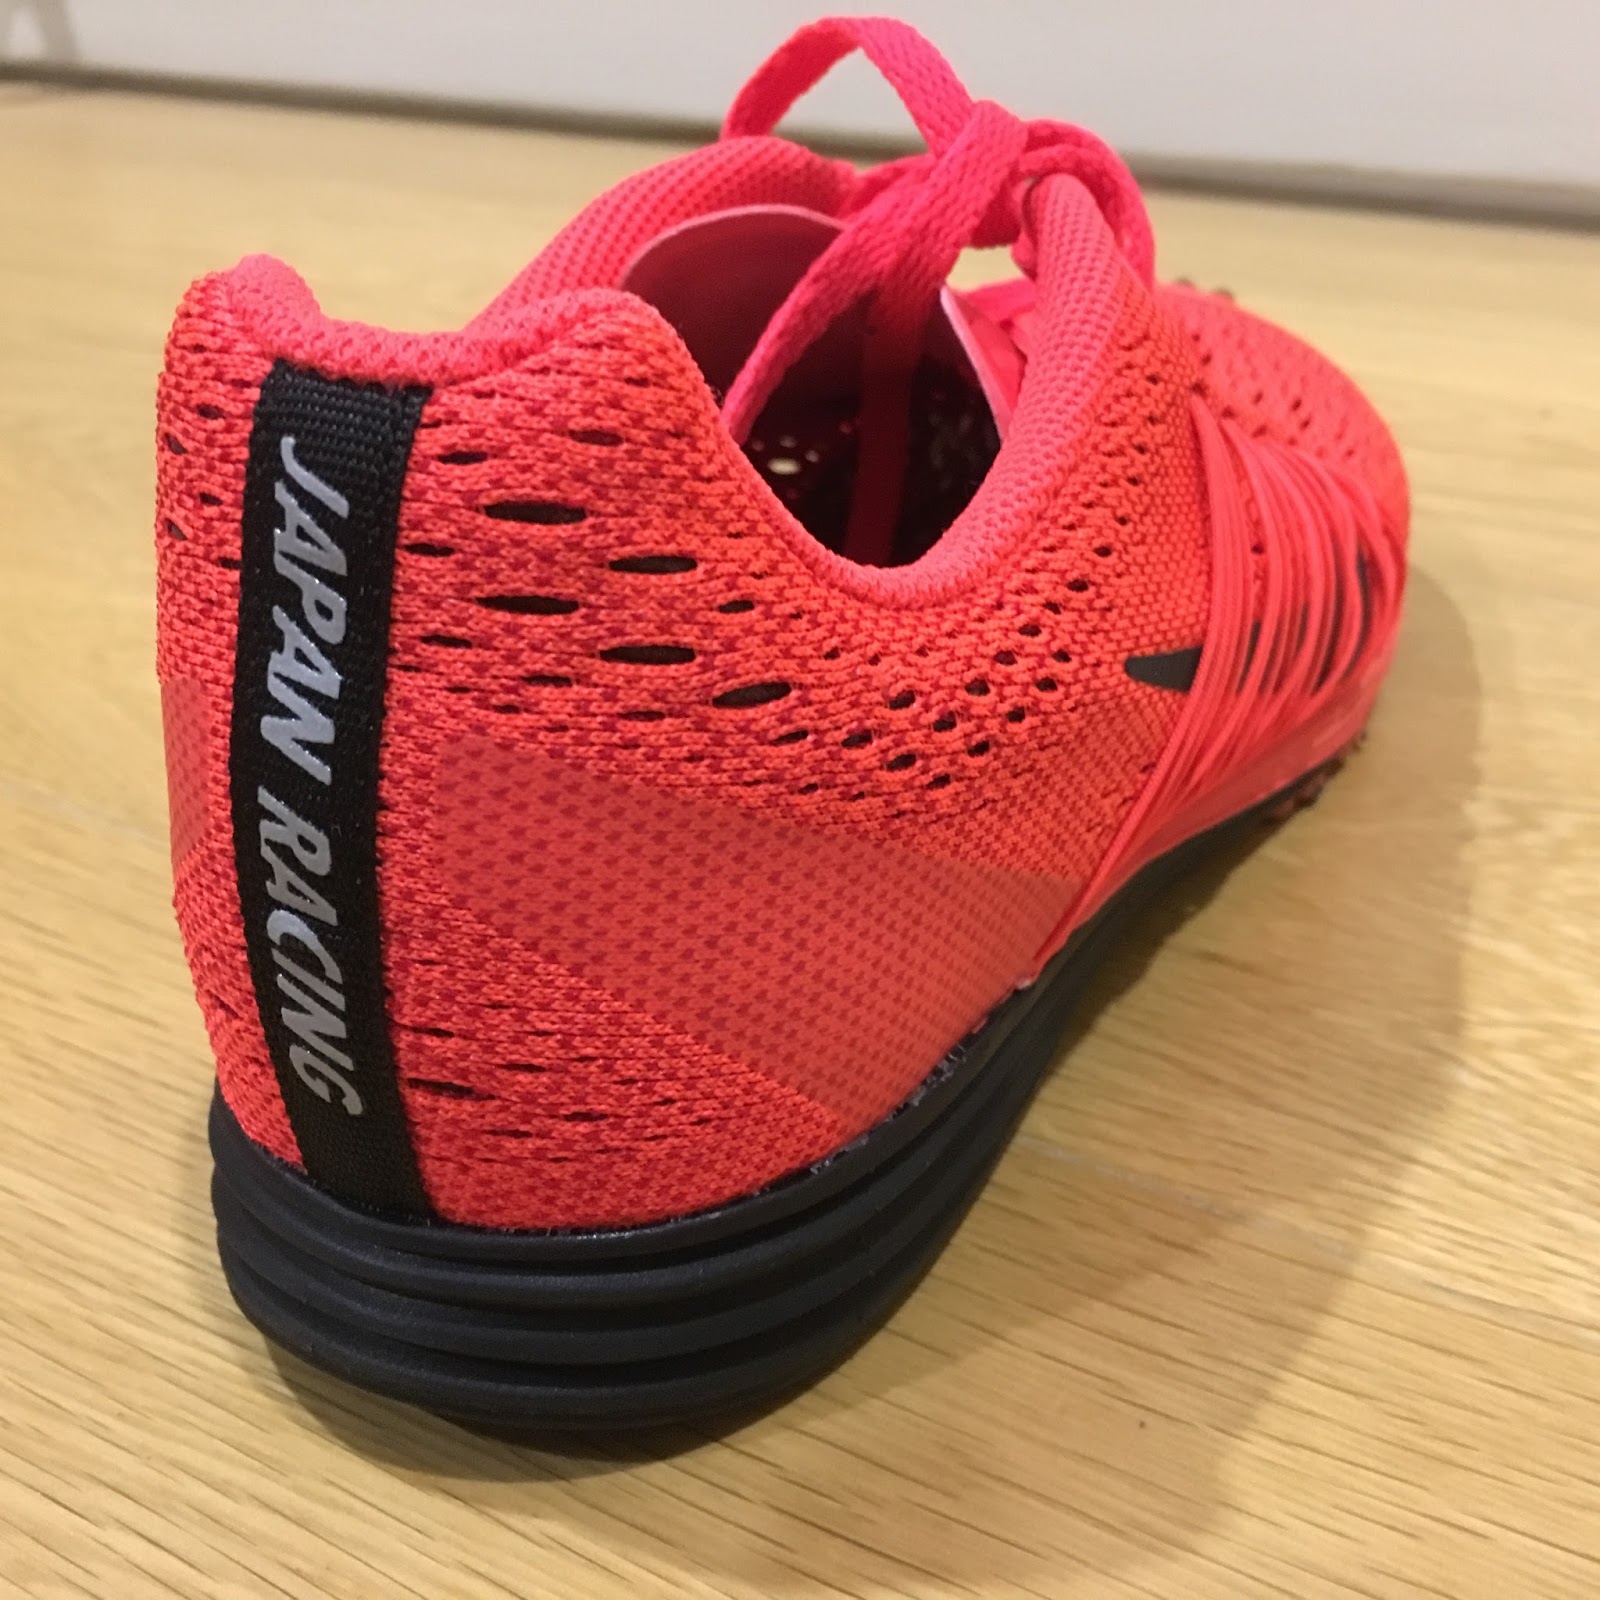 udstilling inaktive Besætte Road Trail Run: Japan Edition Run Shoes Spotted at the 2016 Tokyo Marathon:  Asics Tarther and Freaks Japan, Mizuno Wave Emperor, Nike Zoom Speed Rival  5 and Lunarspider R6, and More